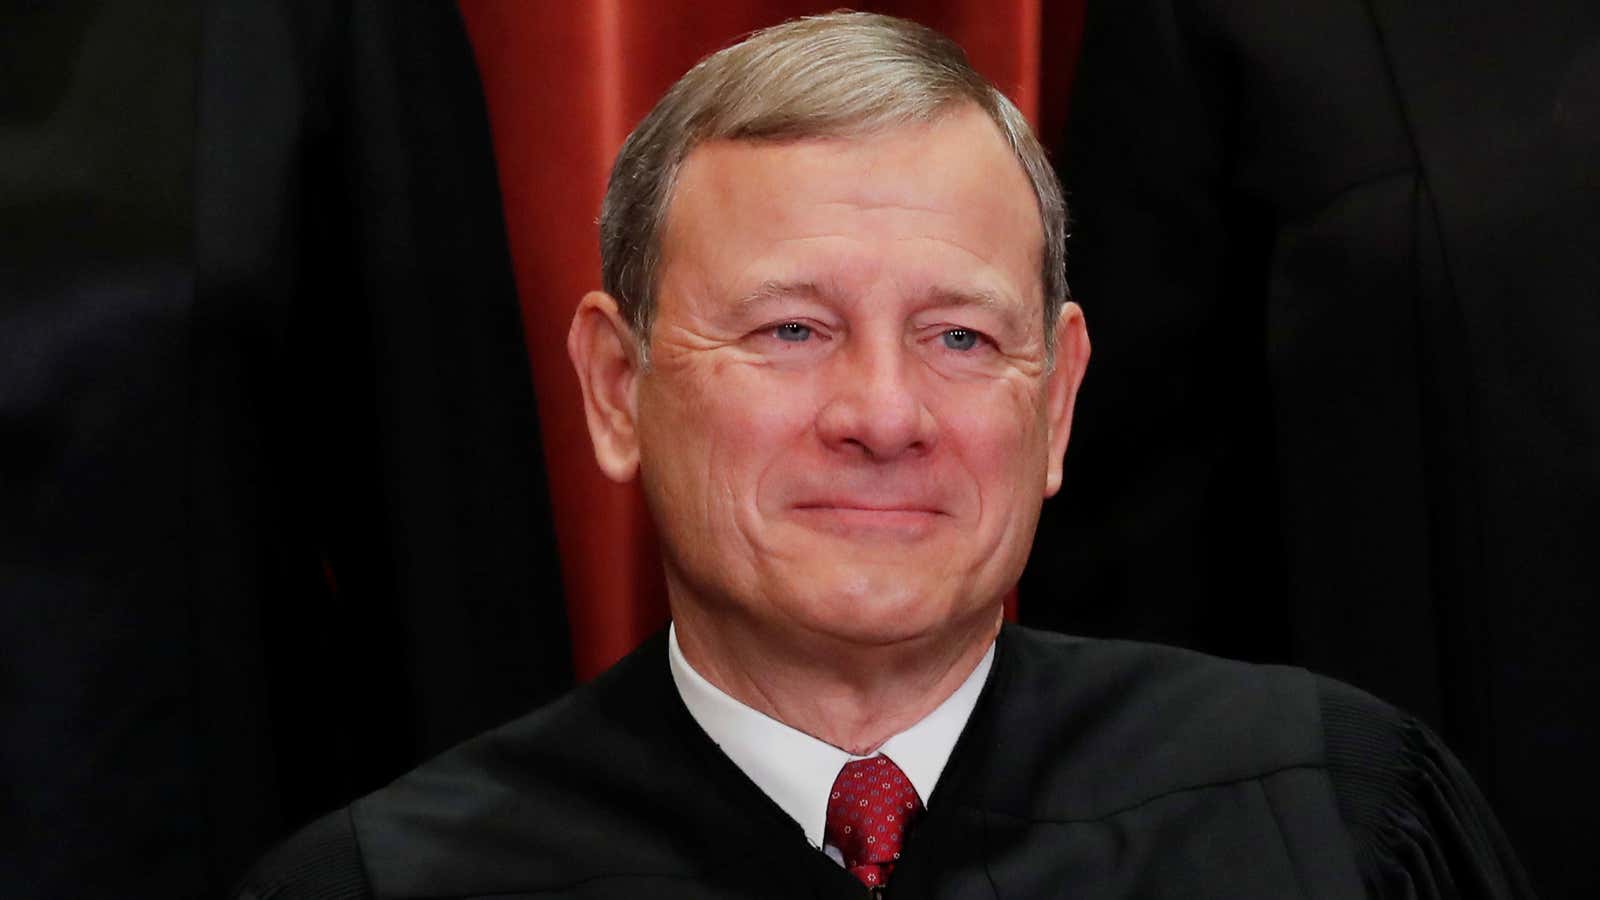 The chief justice of the US Supreme Court knows we can’t go it alone.